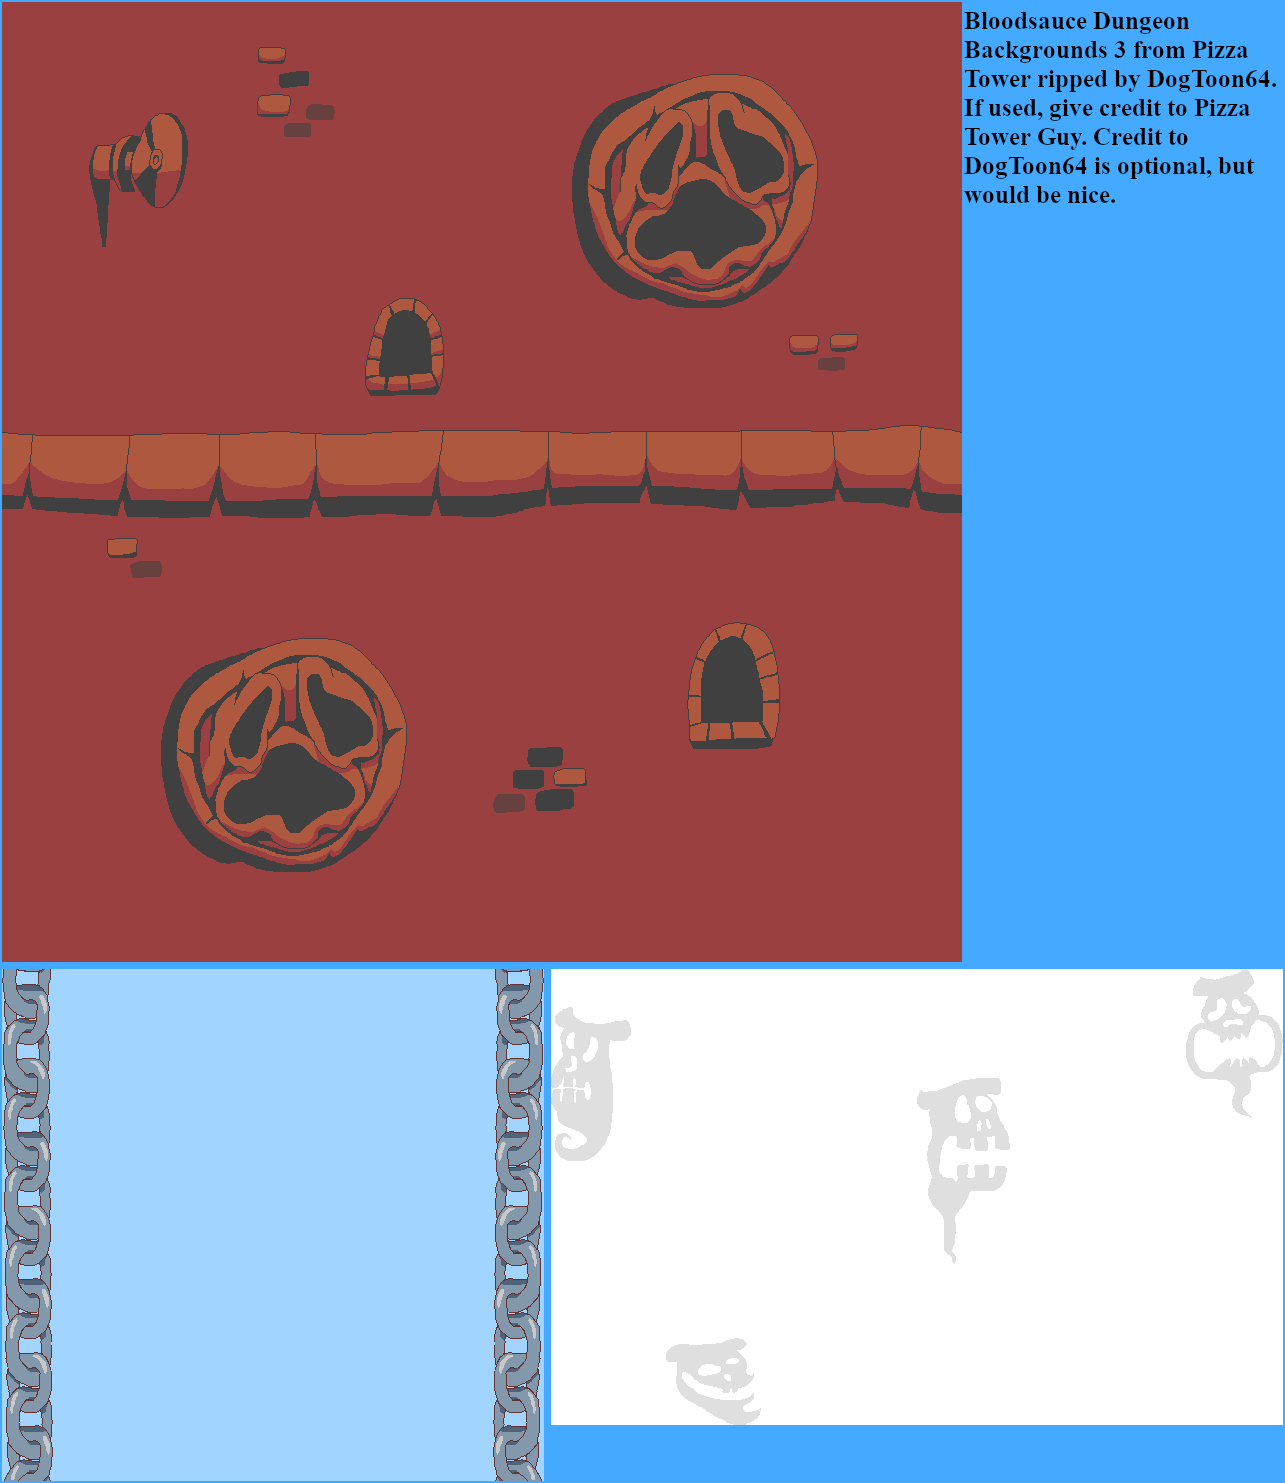 Pizza Tower - Bloodsauce Dungeon Backgrounds 3